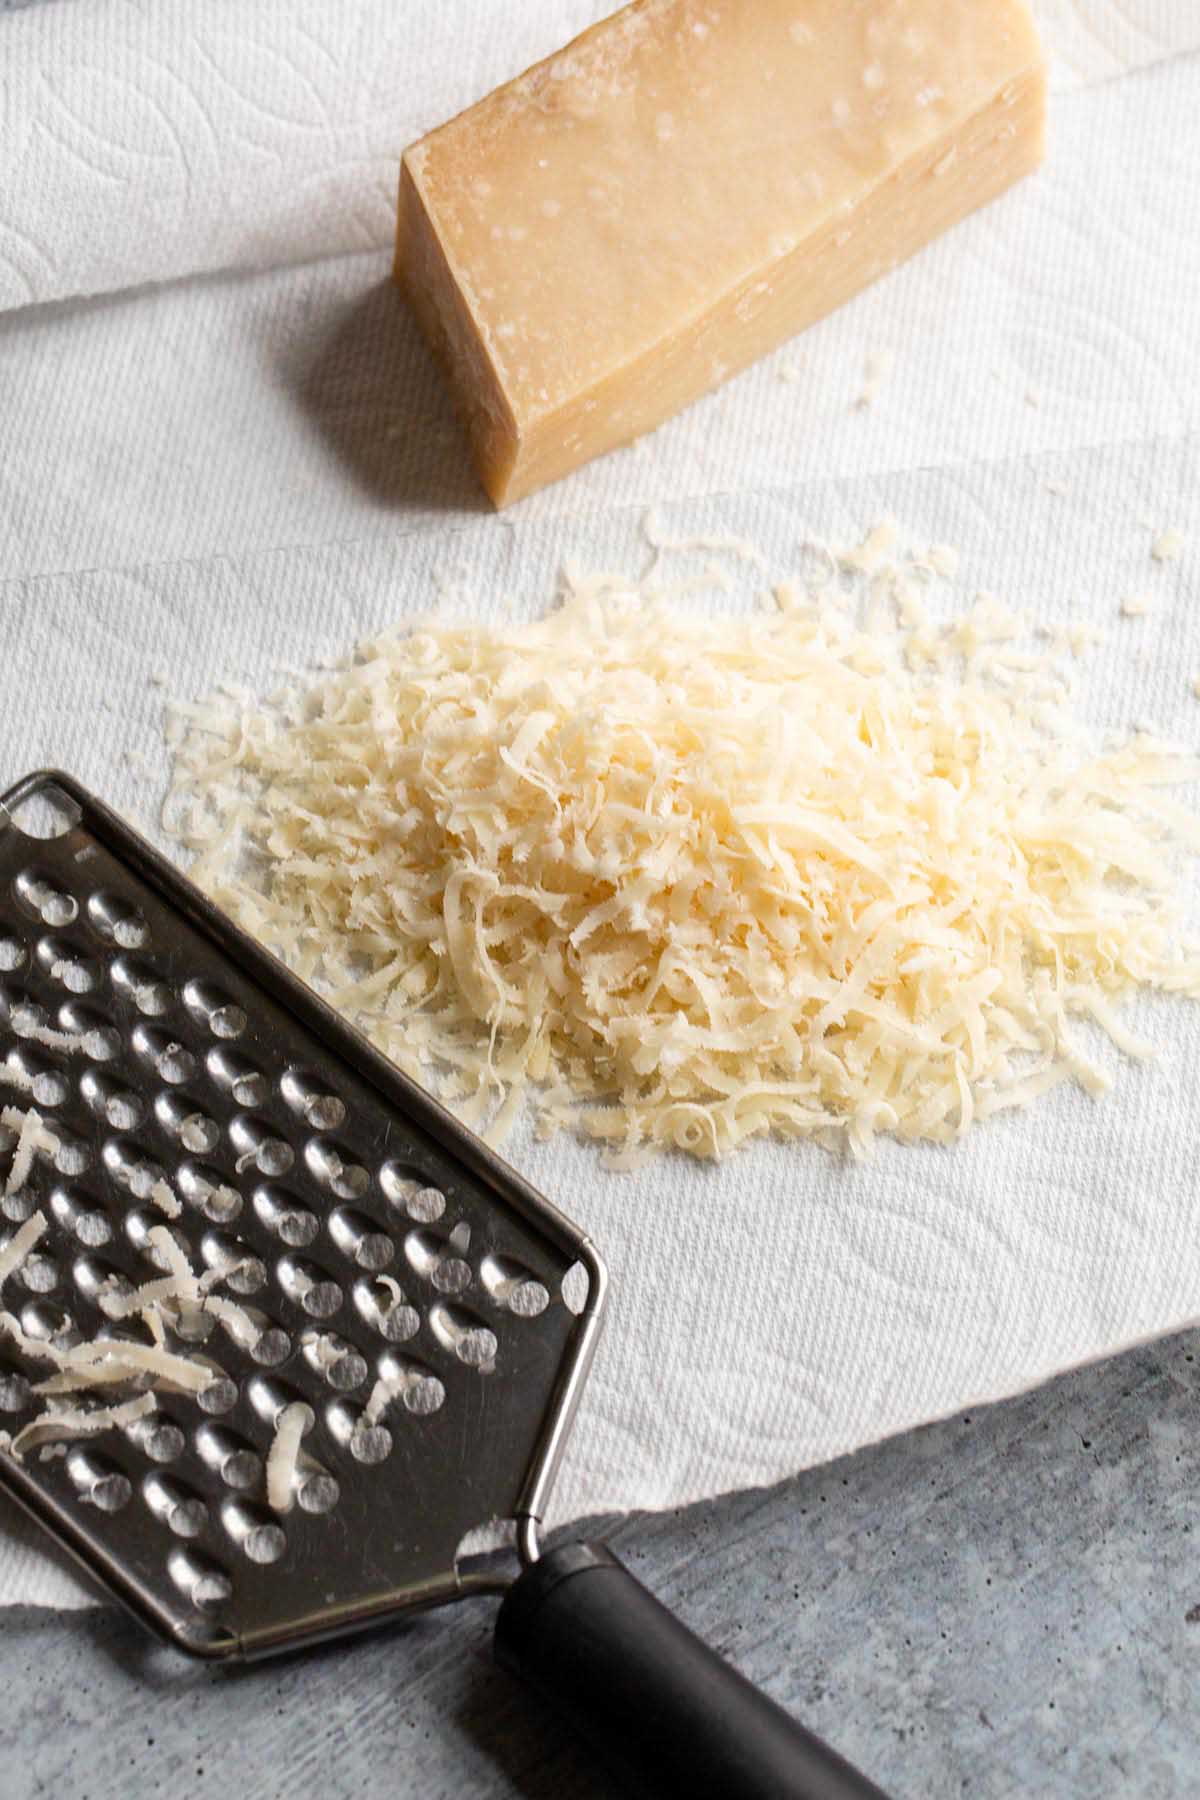 Grated parmesan cheese.